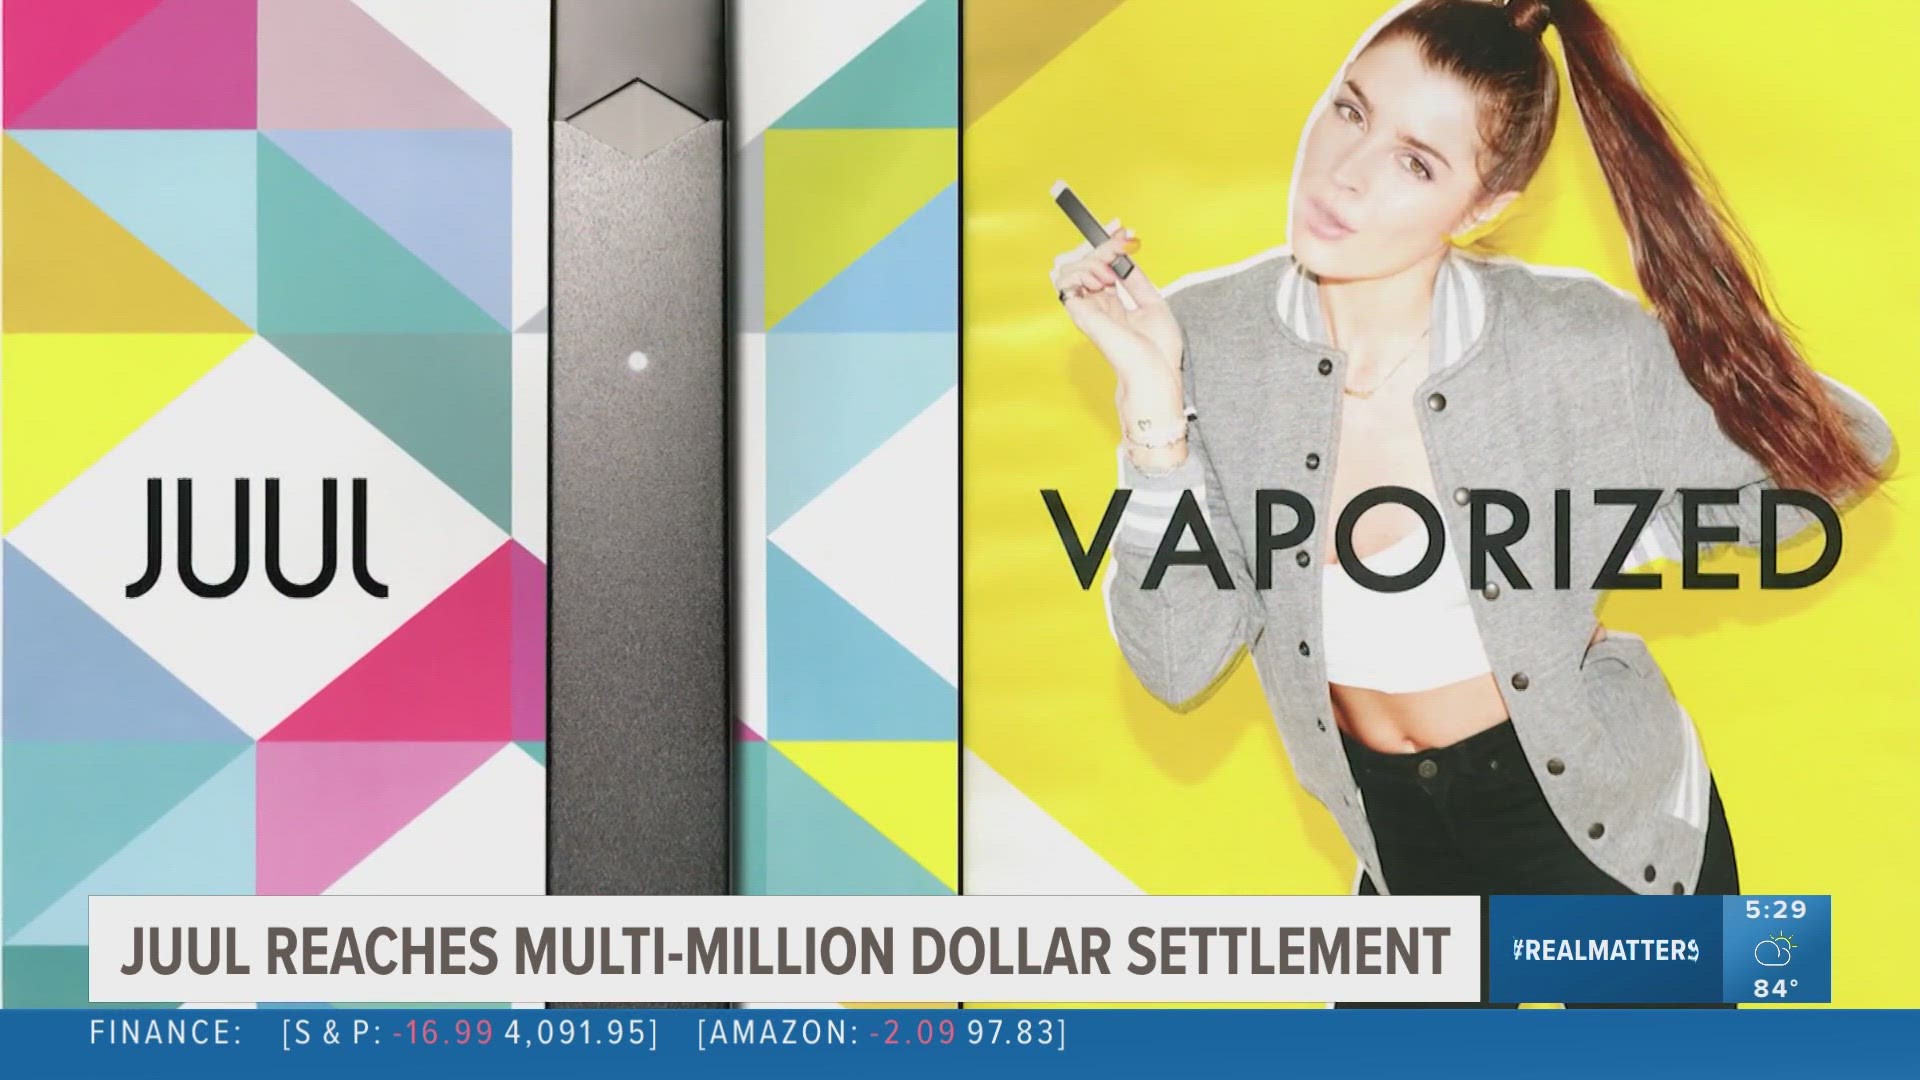 DC sued JUUL for deliberately targeting underage users; failing to verify ages of purchasers and lying to consumers about the content, strength, and safety.